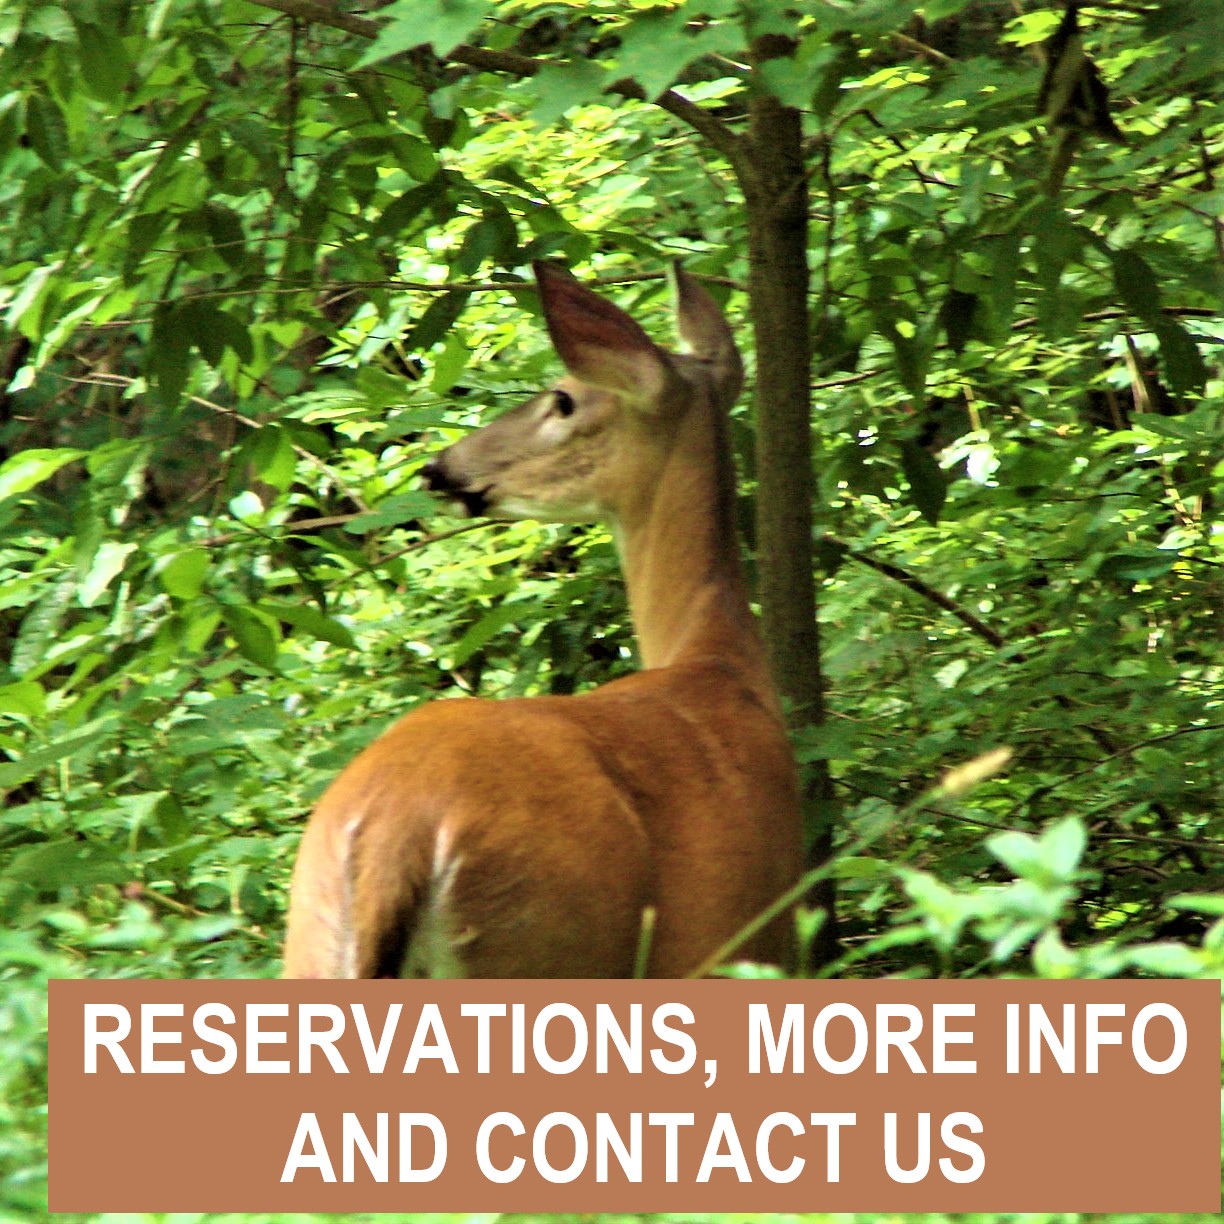 Reservations, more info and contact